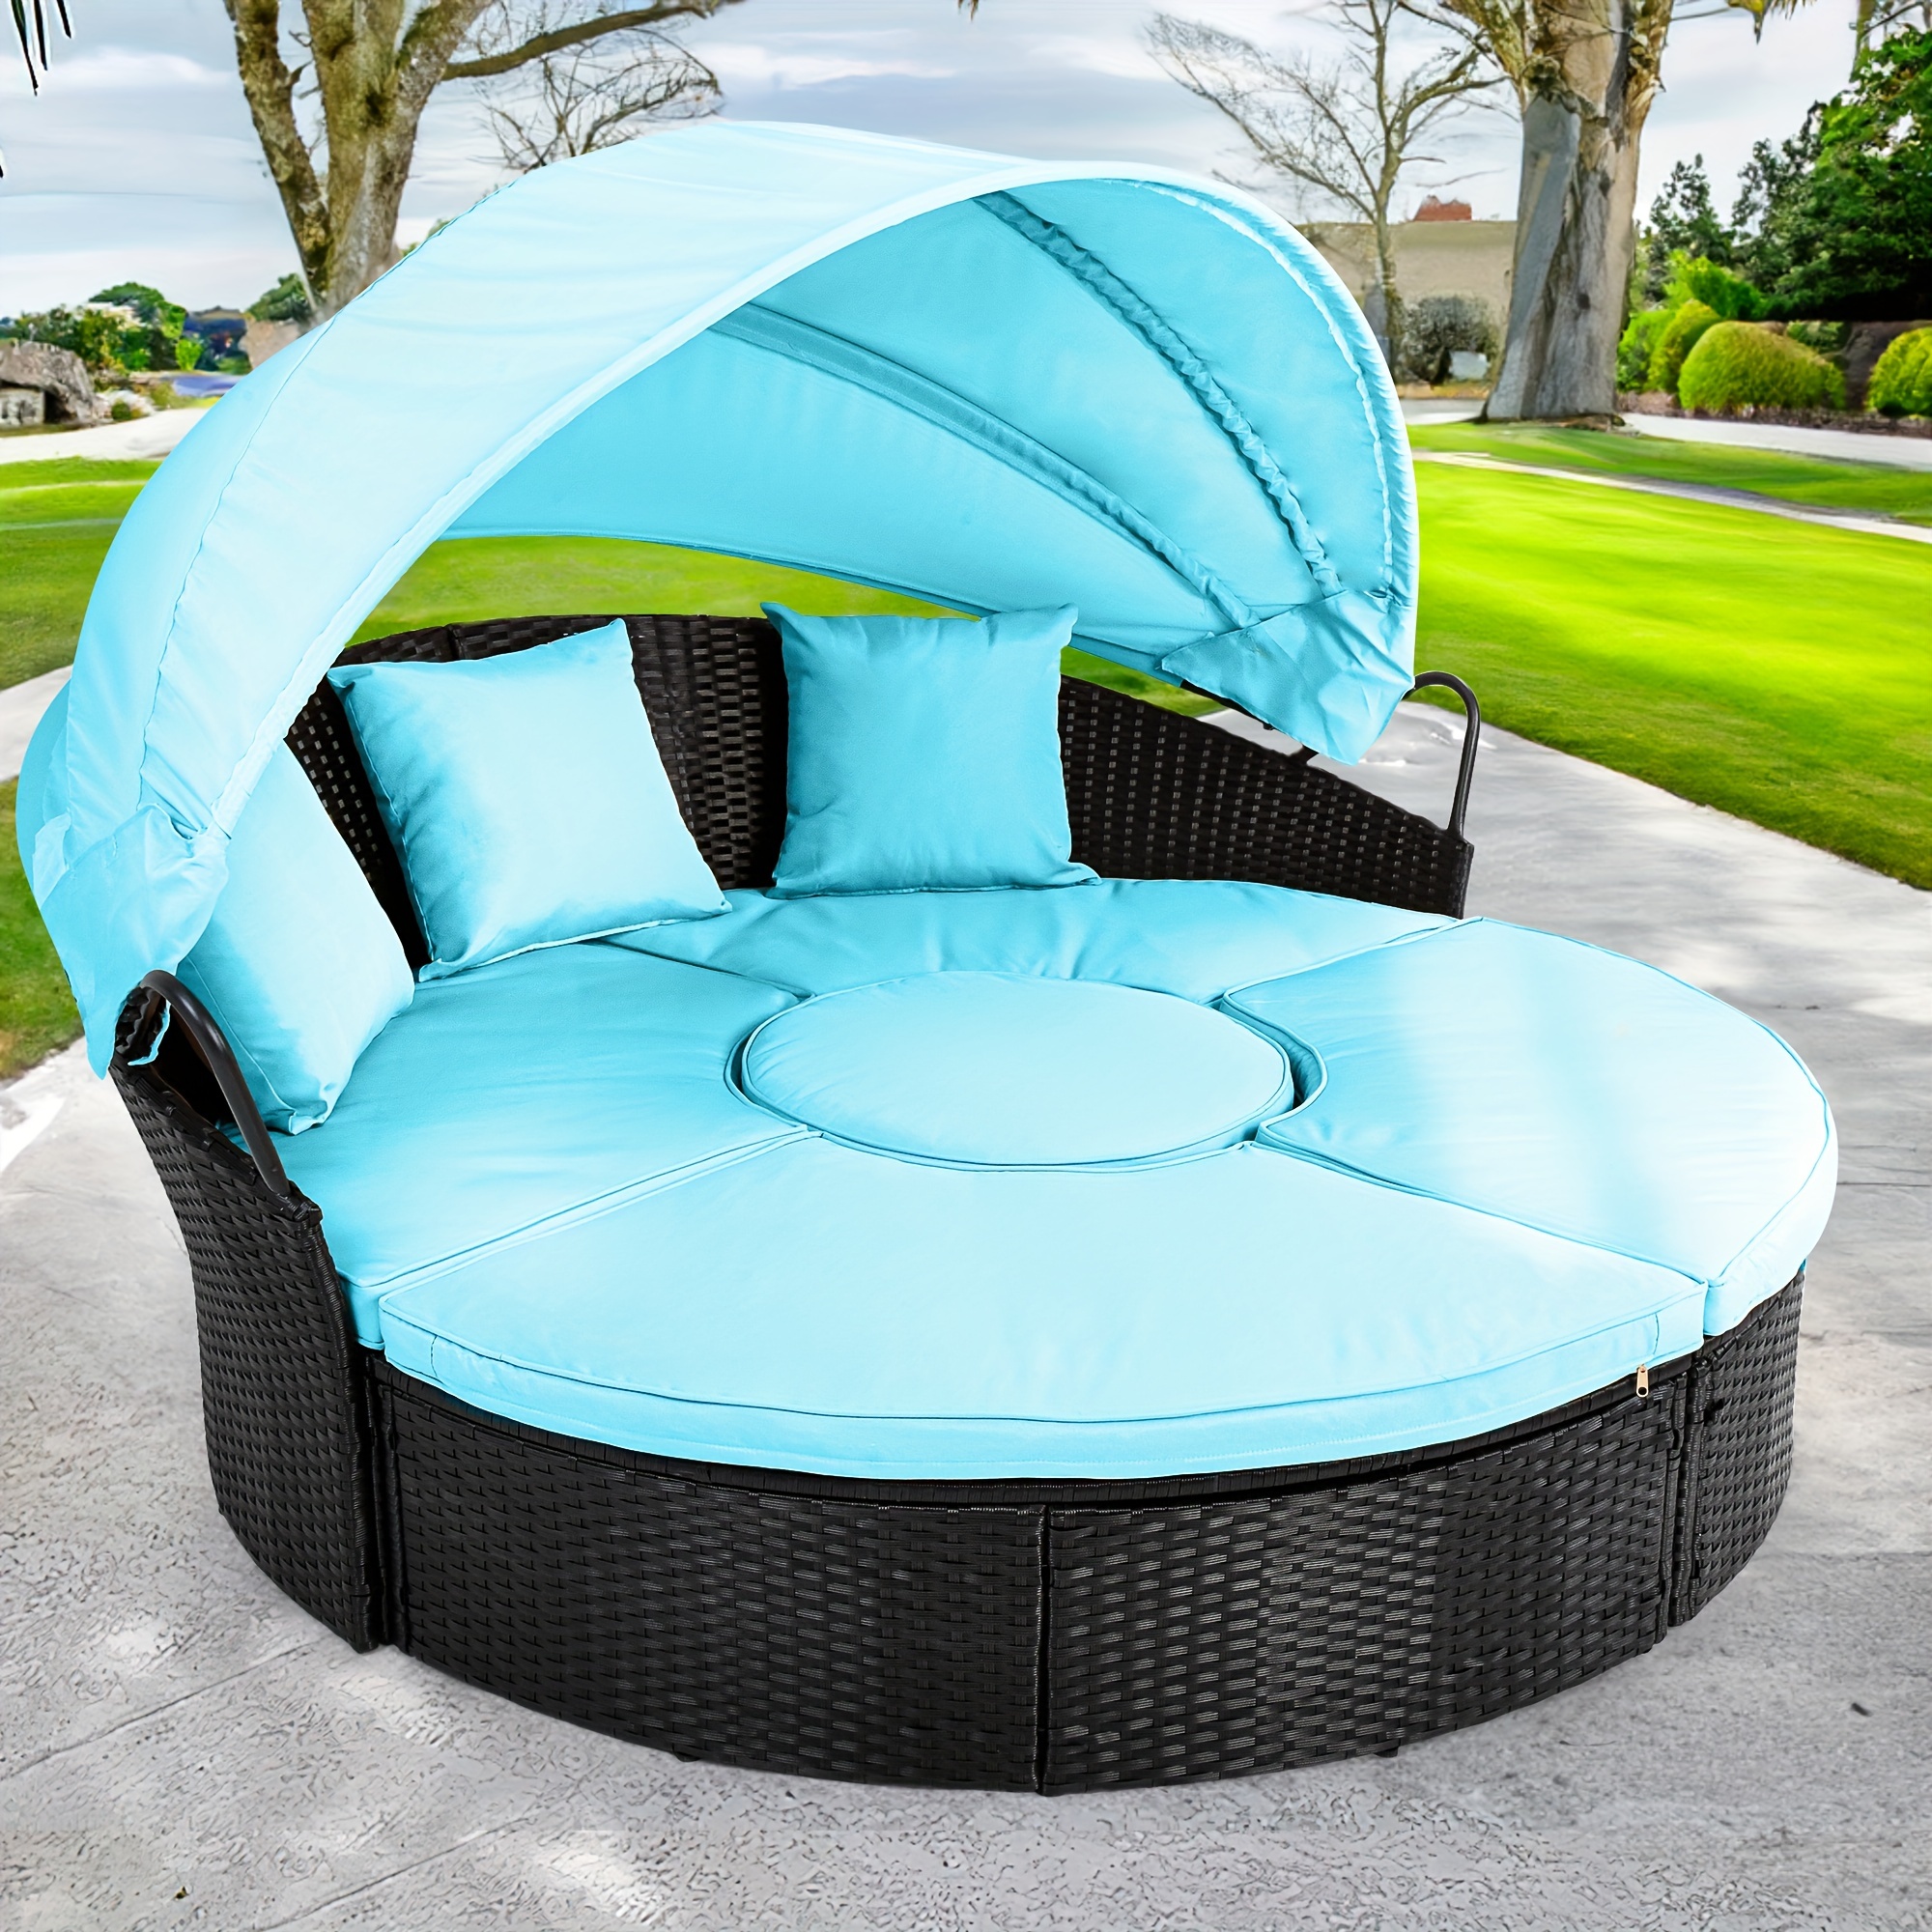 

Homiflex Patio Round Outdoor Daybed With Retractable Canopy Rattan Wicker Clamshell Furniture Seating With Soft Cushions For Backyard Porch Poolside (turquoise)